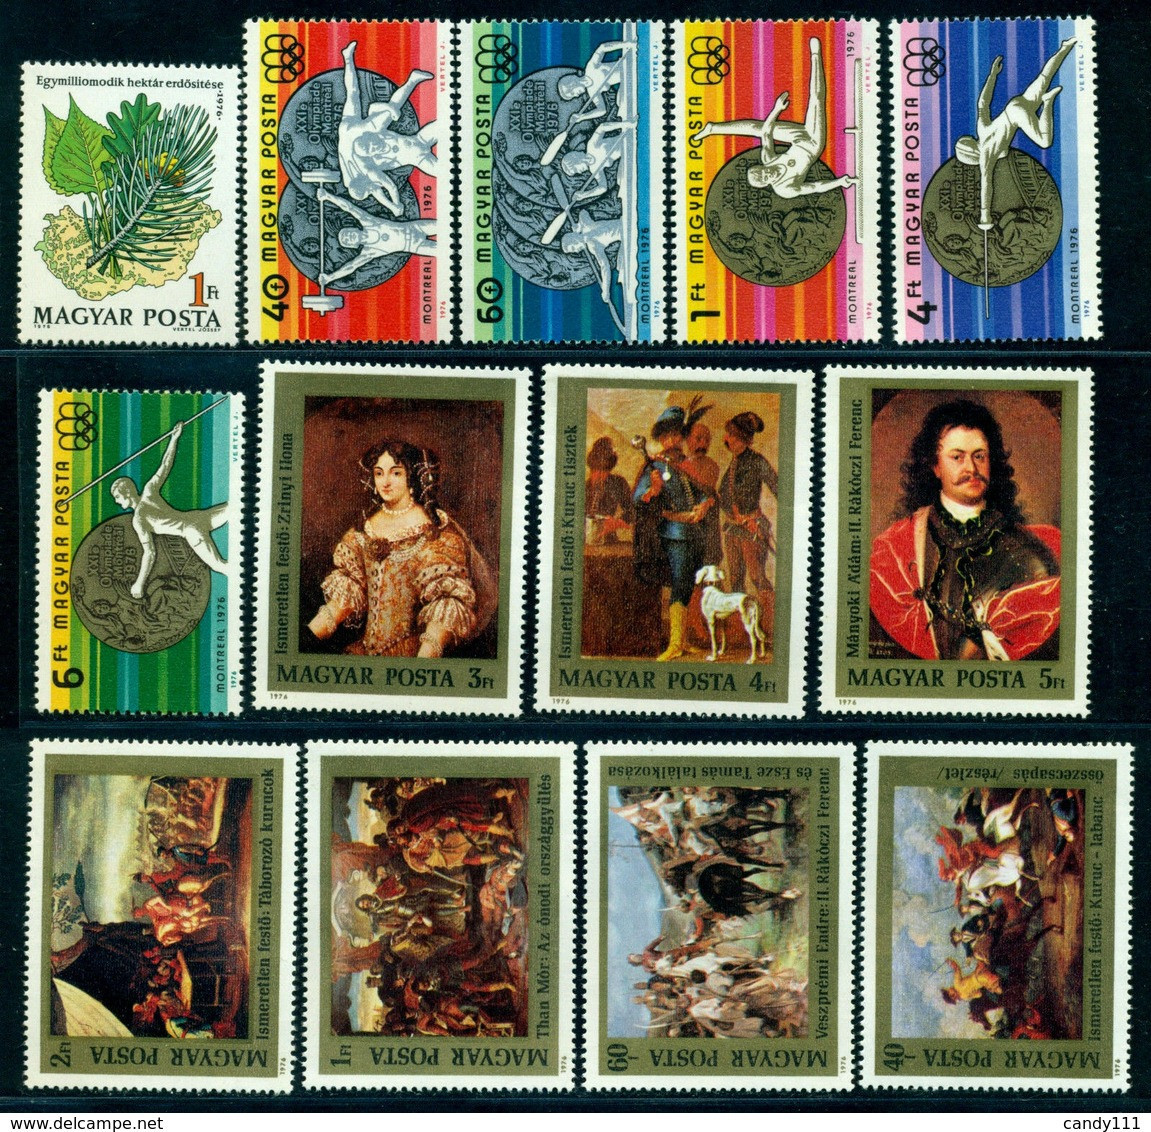 1976 Hungary,Ungarn,Hongrie,Ungheria,Complete Year Set=64 Stamps+6s/s,CV$100,MNH - Full Years